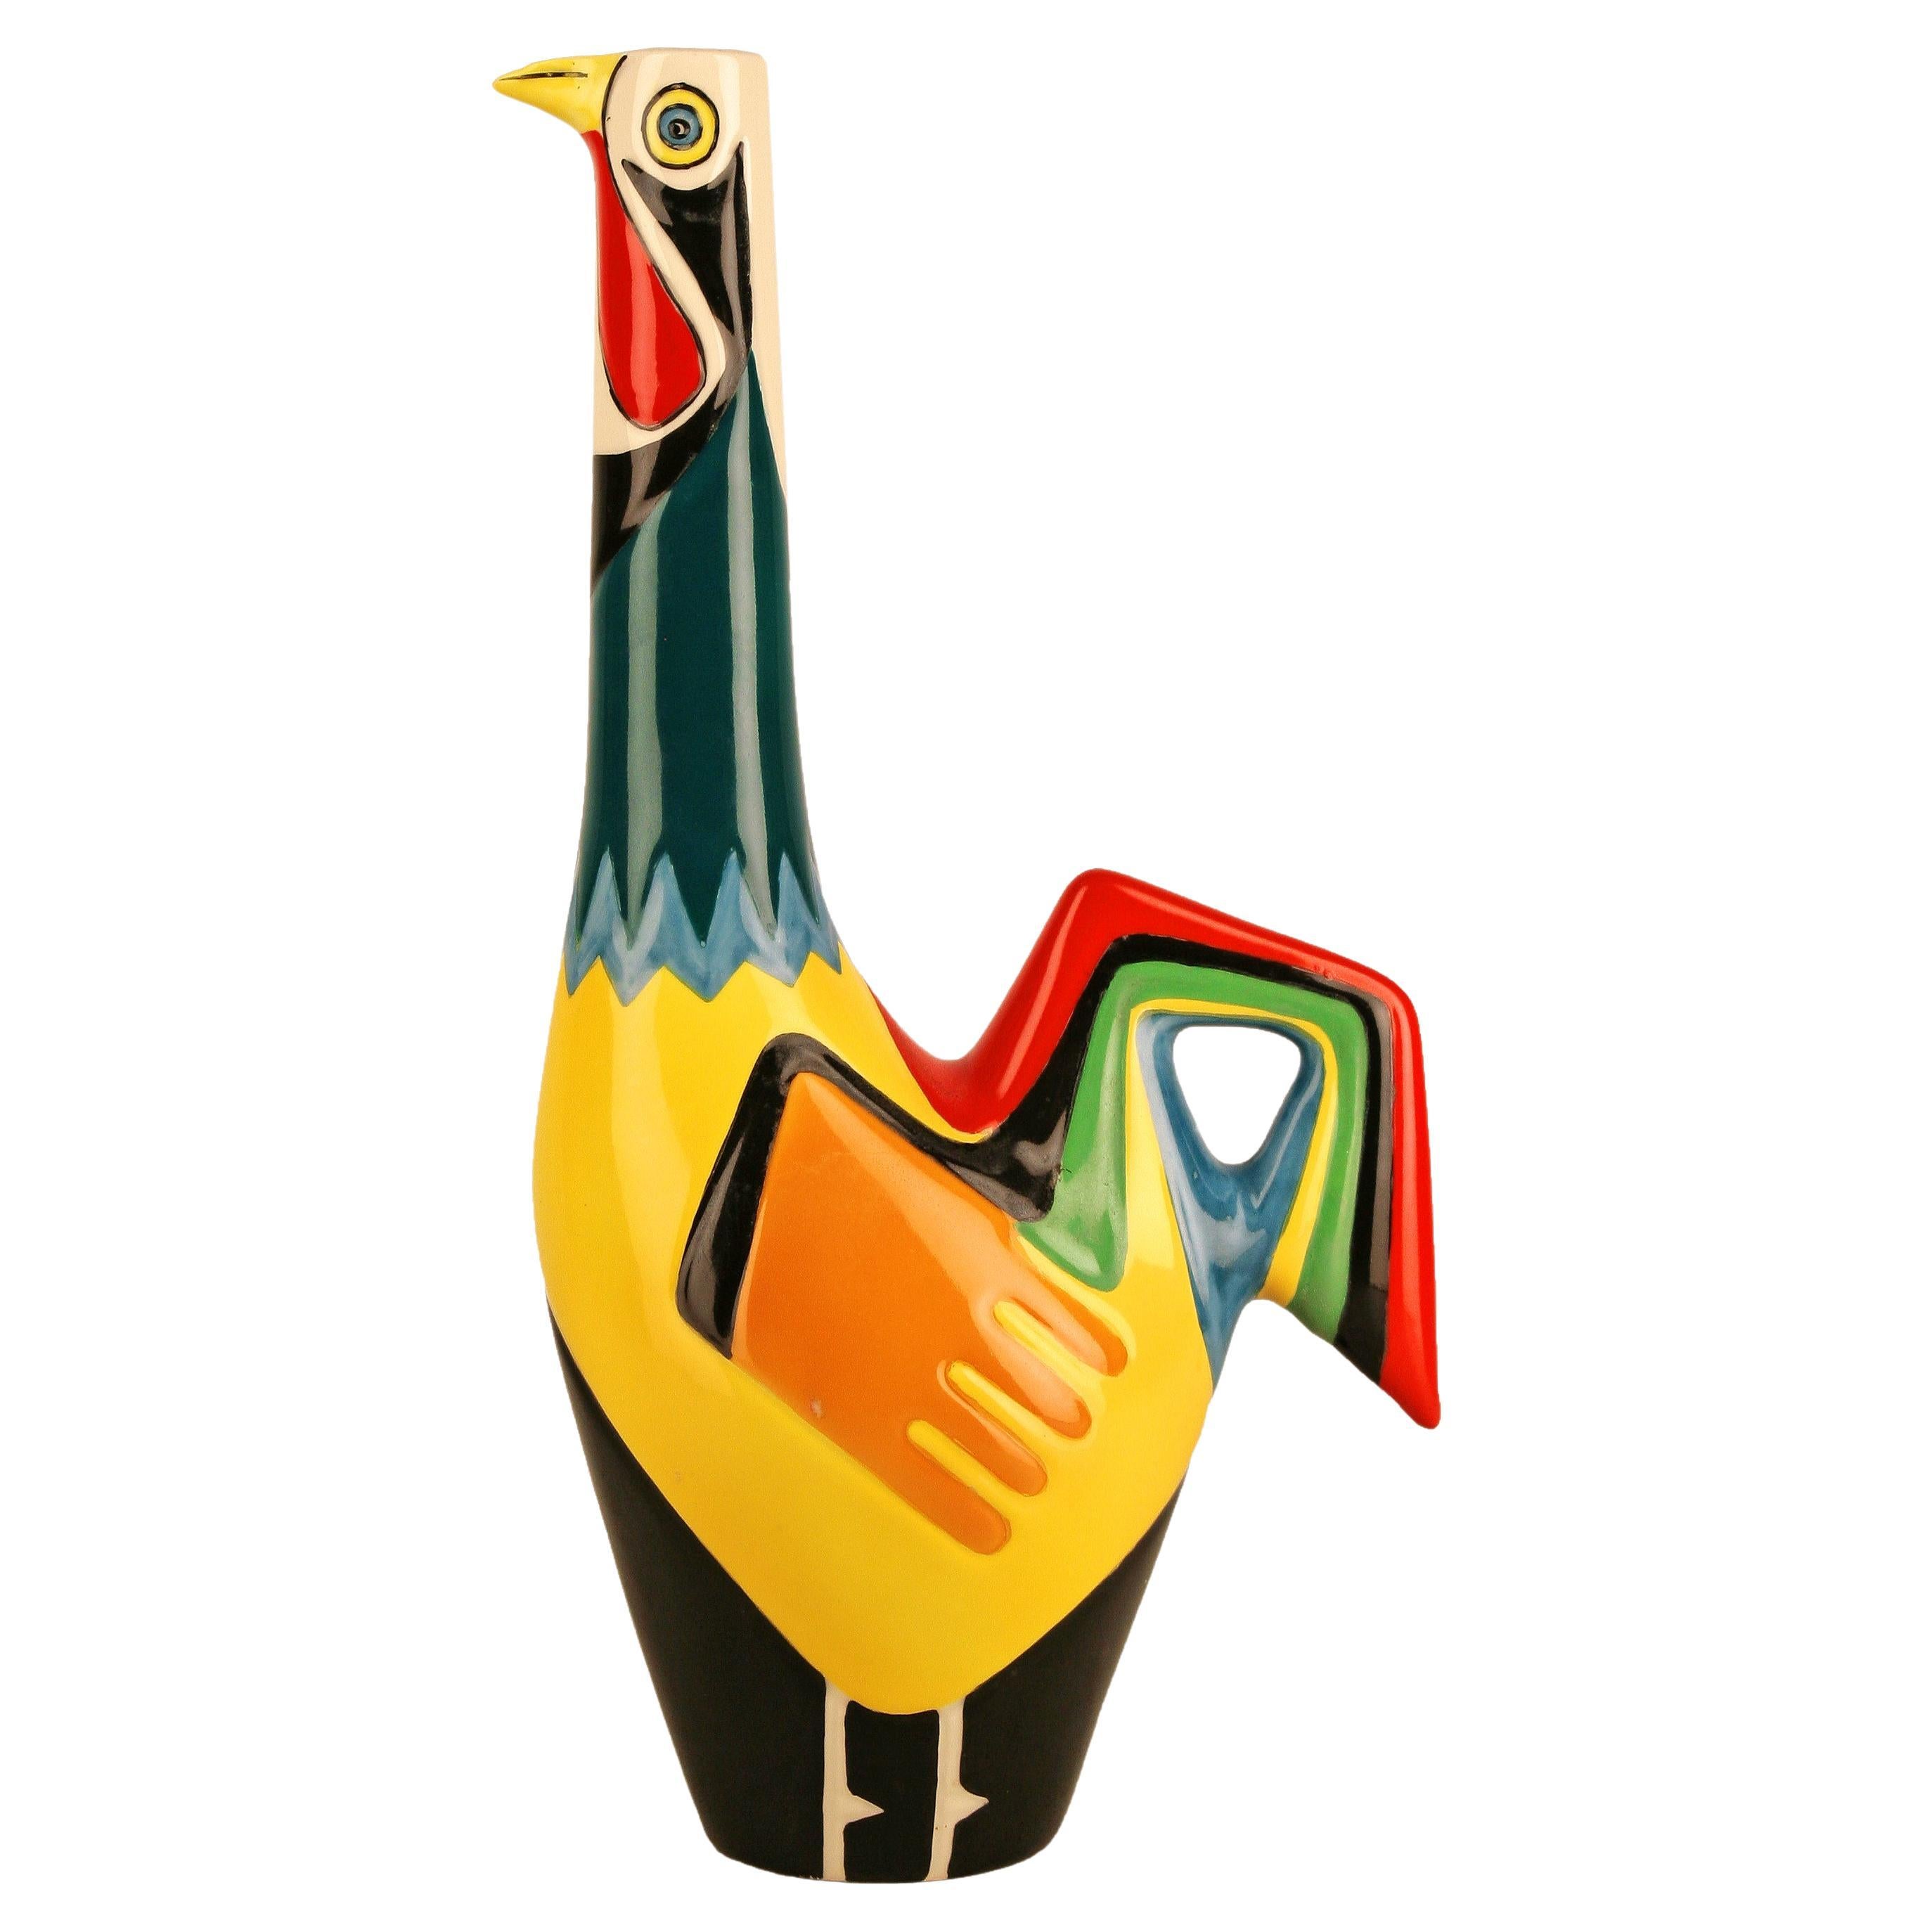 Portuguese Colorful Enameled Ceramic Rooster Decanter/Pitcher by Real Vinícola For Sale